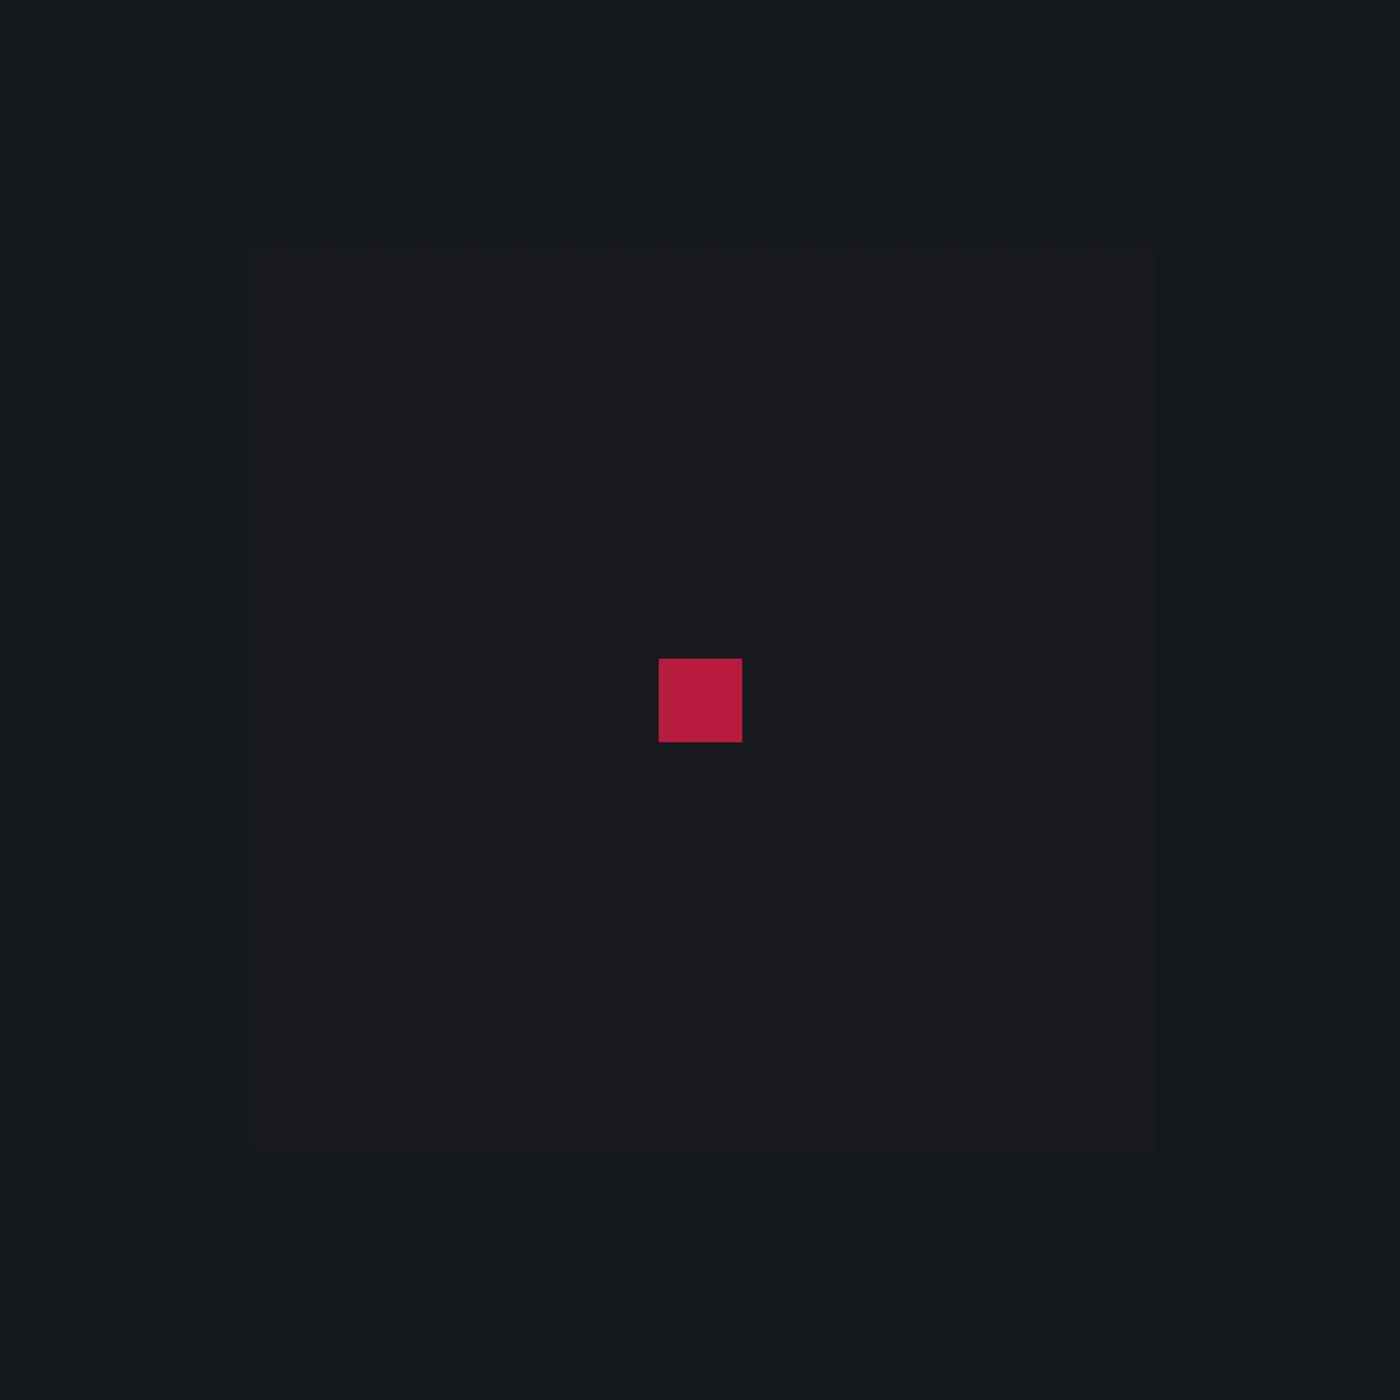 A black square with a red point in the middle. 2001 and Johannes Itten inspiration